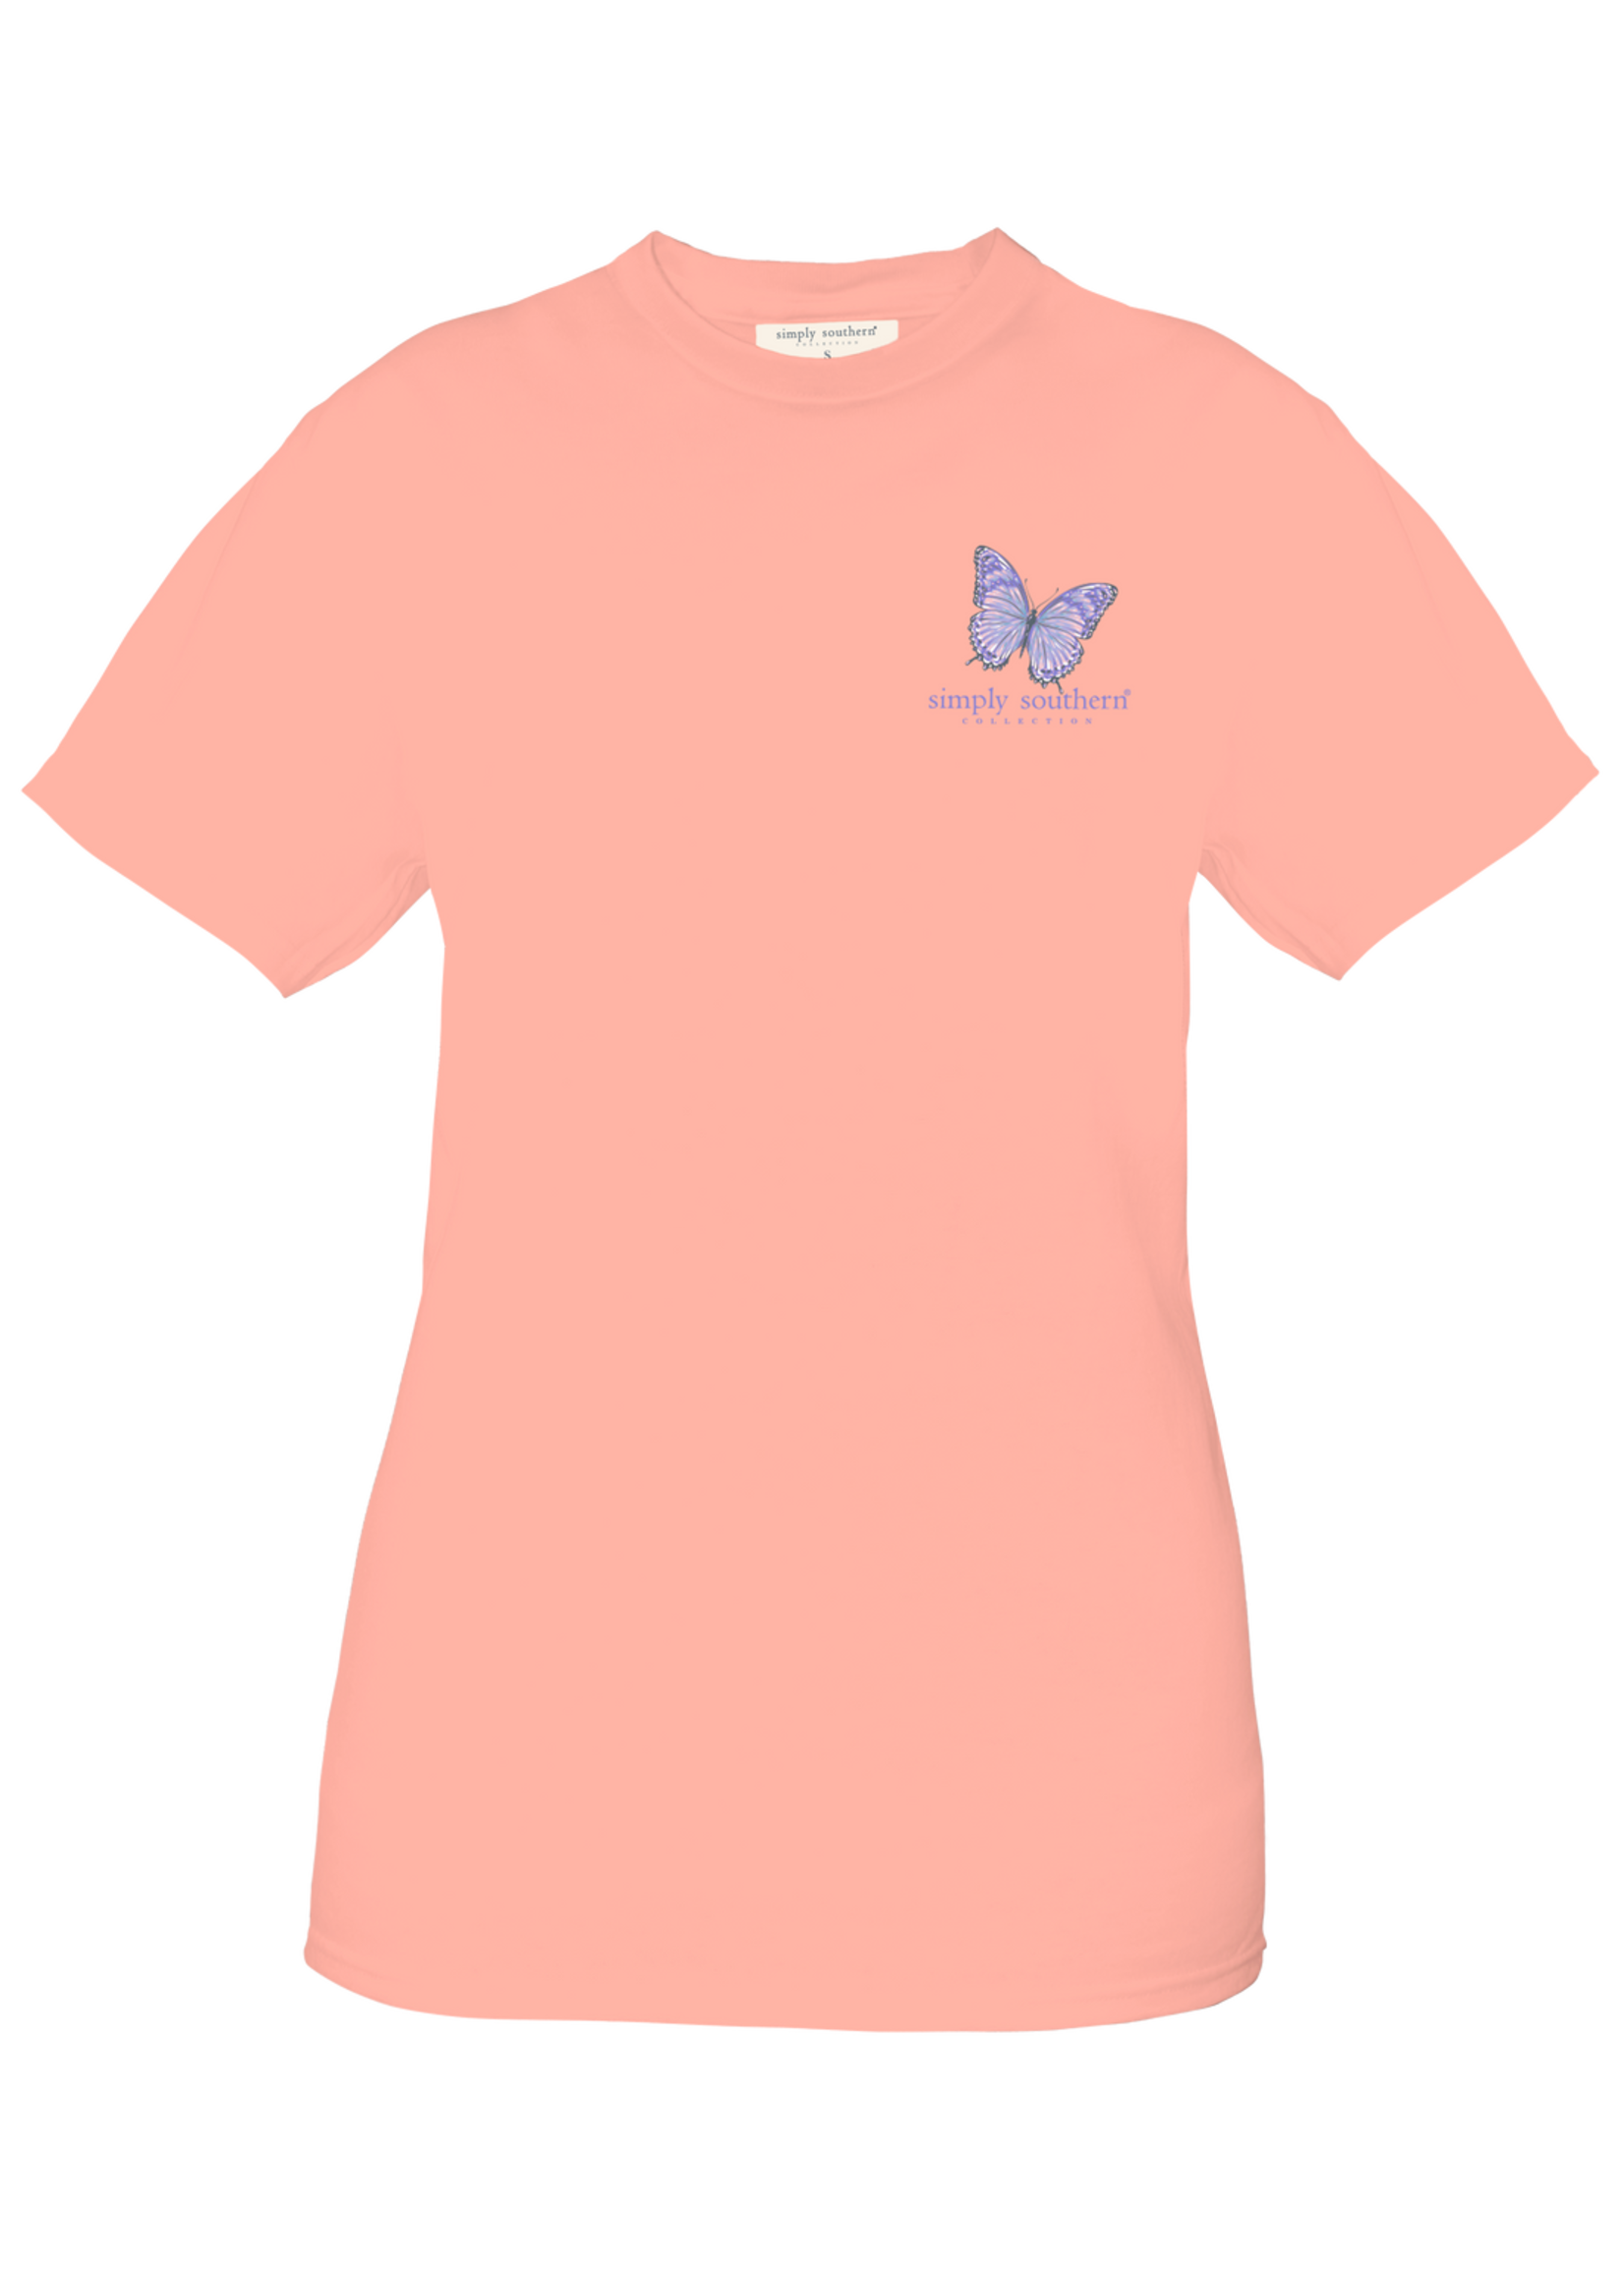 Simply Southern Collection 'Under His Wing' SS T-Shirt